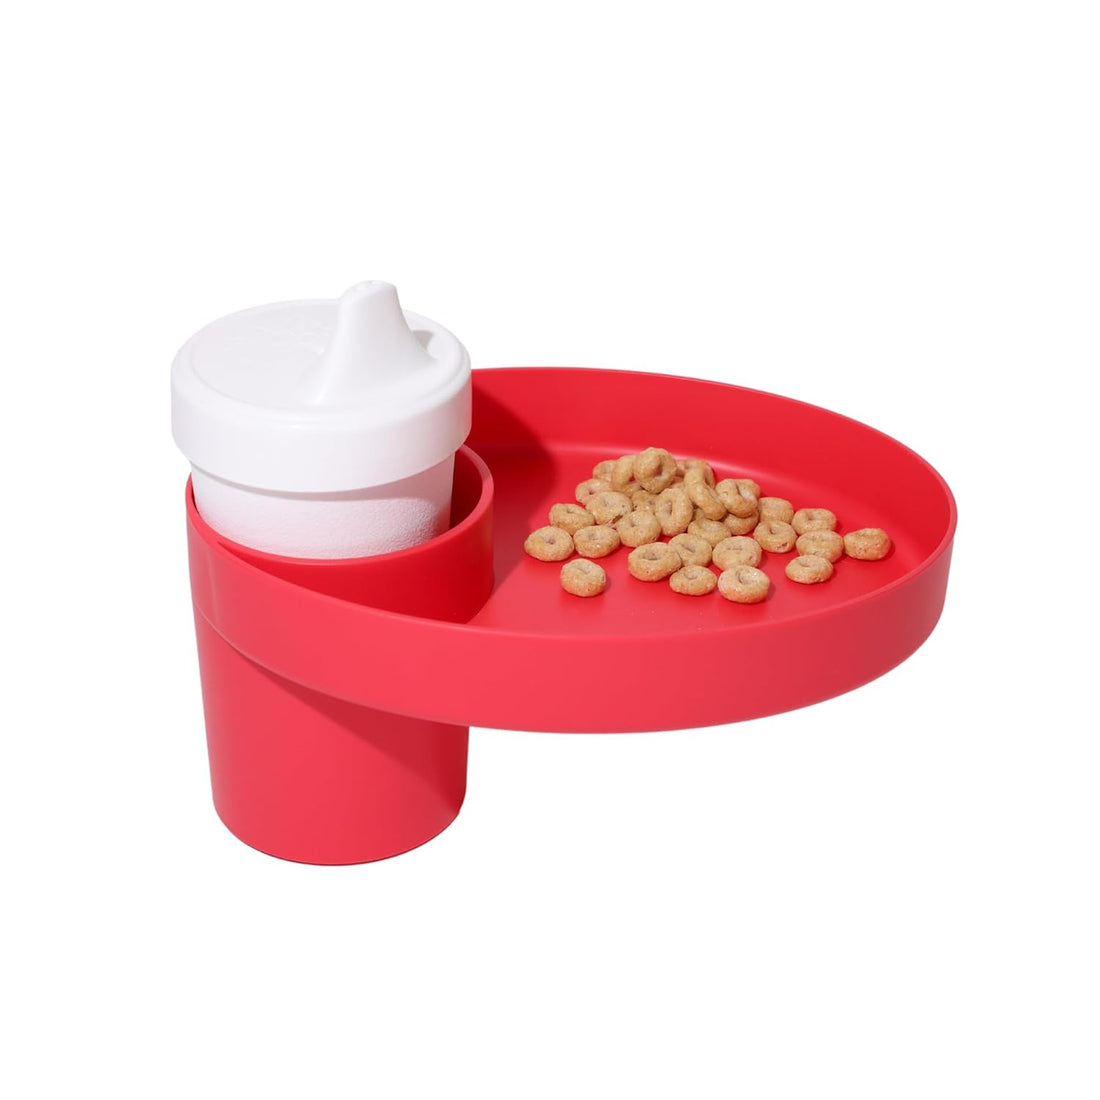 My Travel Tray/Oval - USA Made. Extend Your Current Cup Holder to Hold Your Cup Plus a Tray for Snacks, Toys and Accessories. Enjoyed by Toddlers, Kids and Adults! (Coral Red)